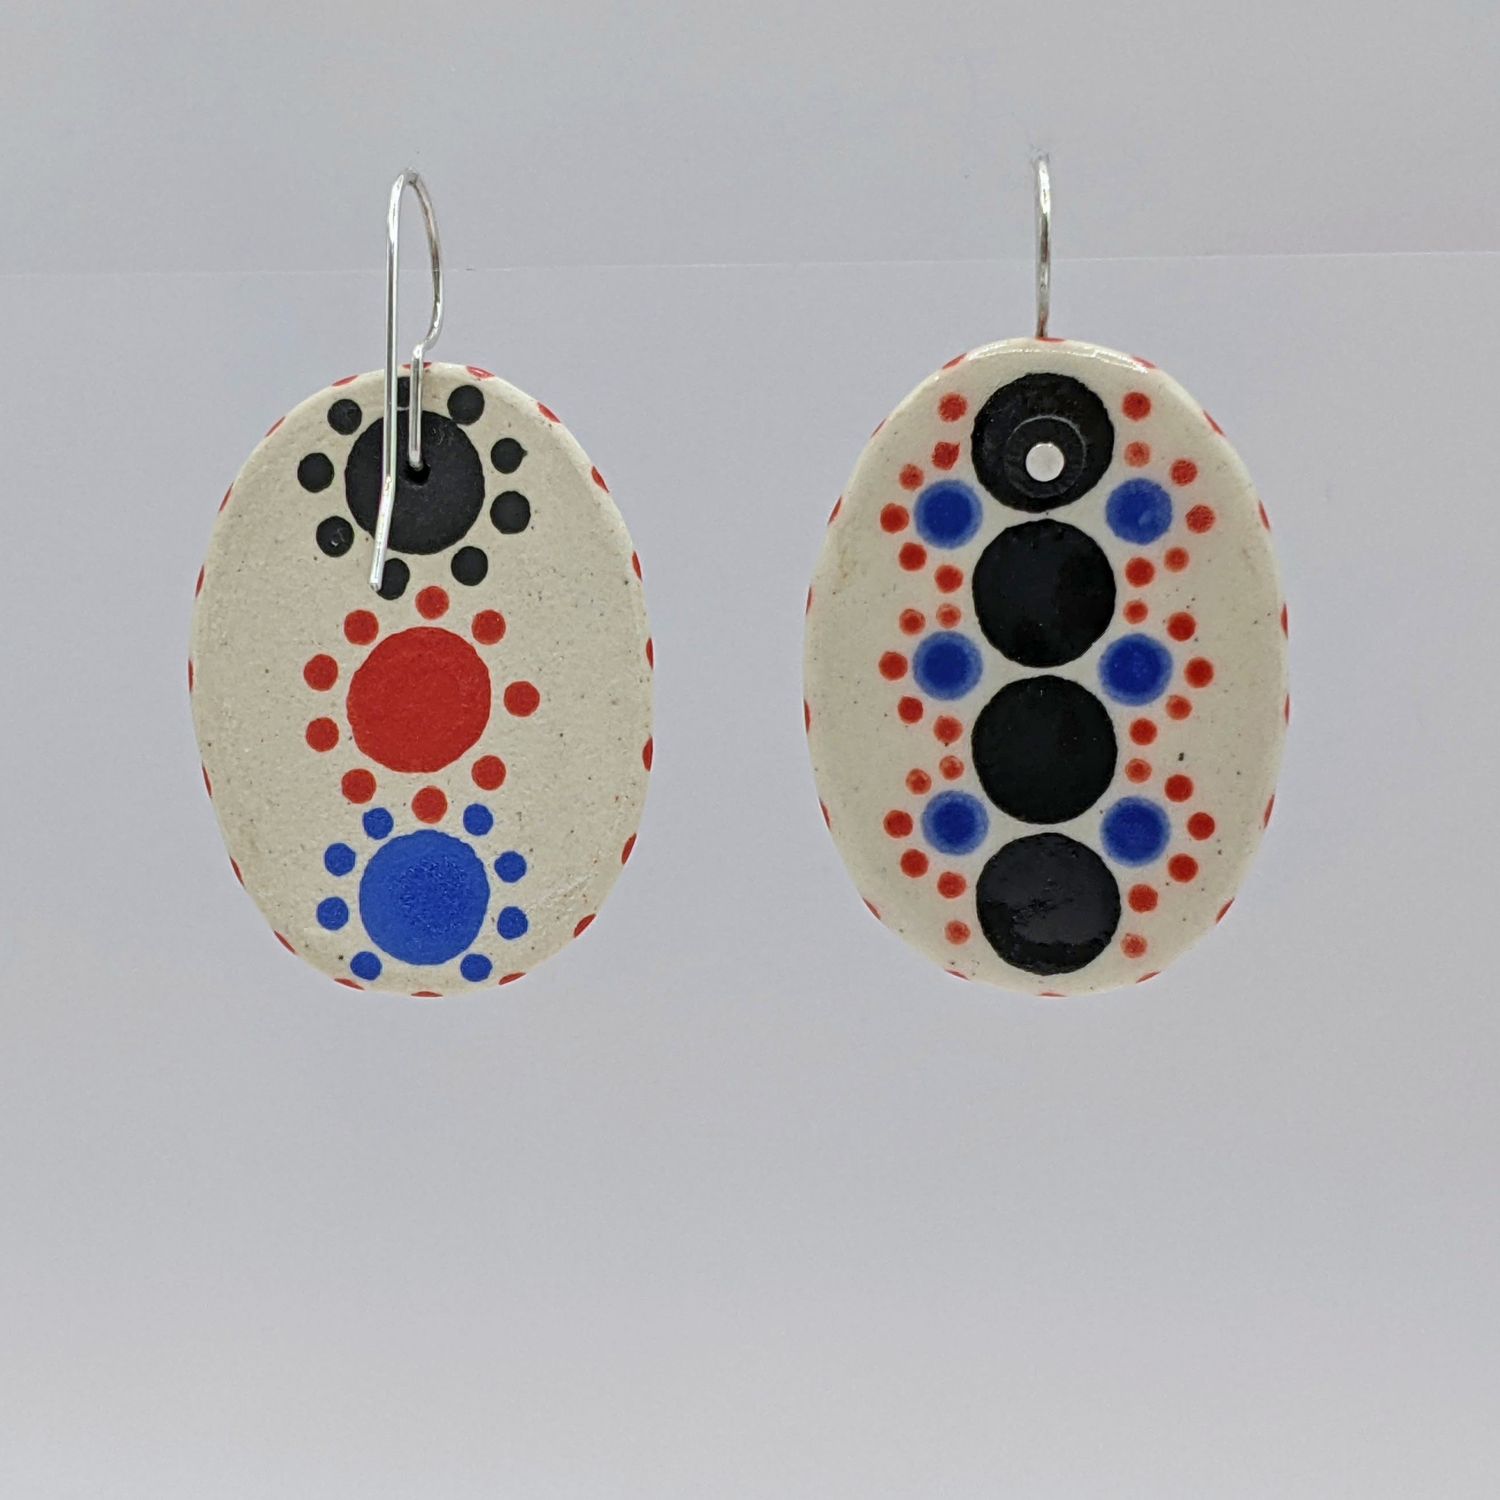 Here and Here: Black and Multi-Coloured Dotted Ceramic Disc Earrings Product Image 2 of 3